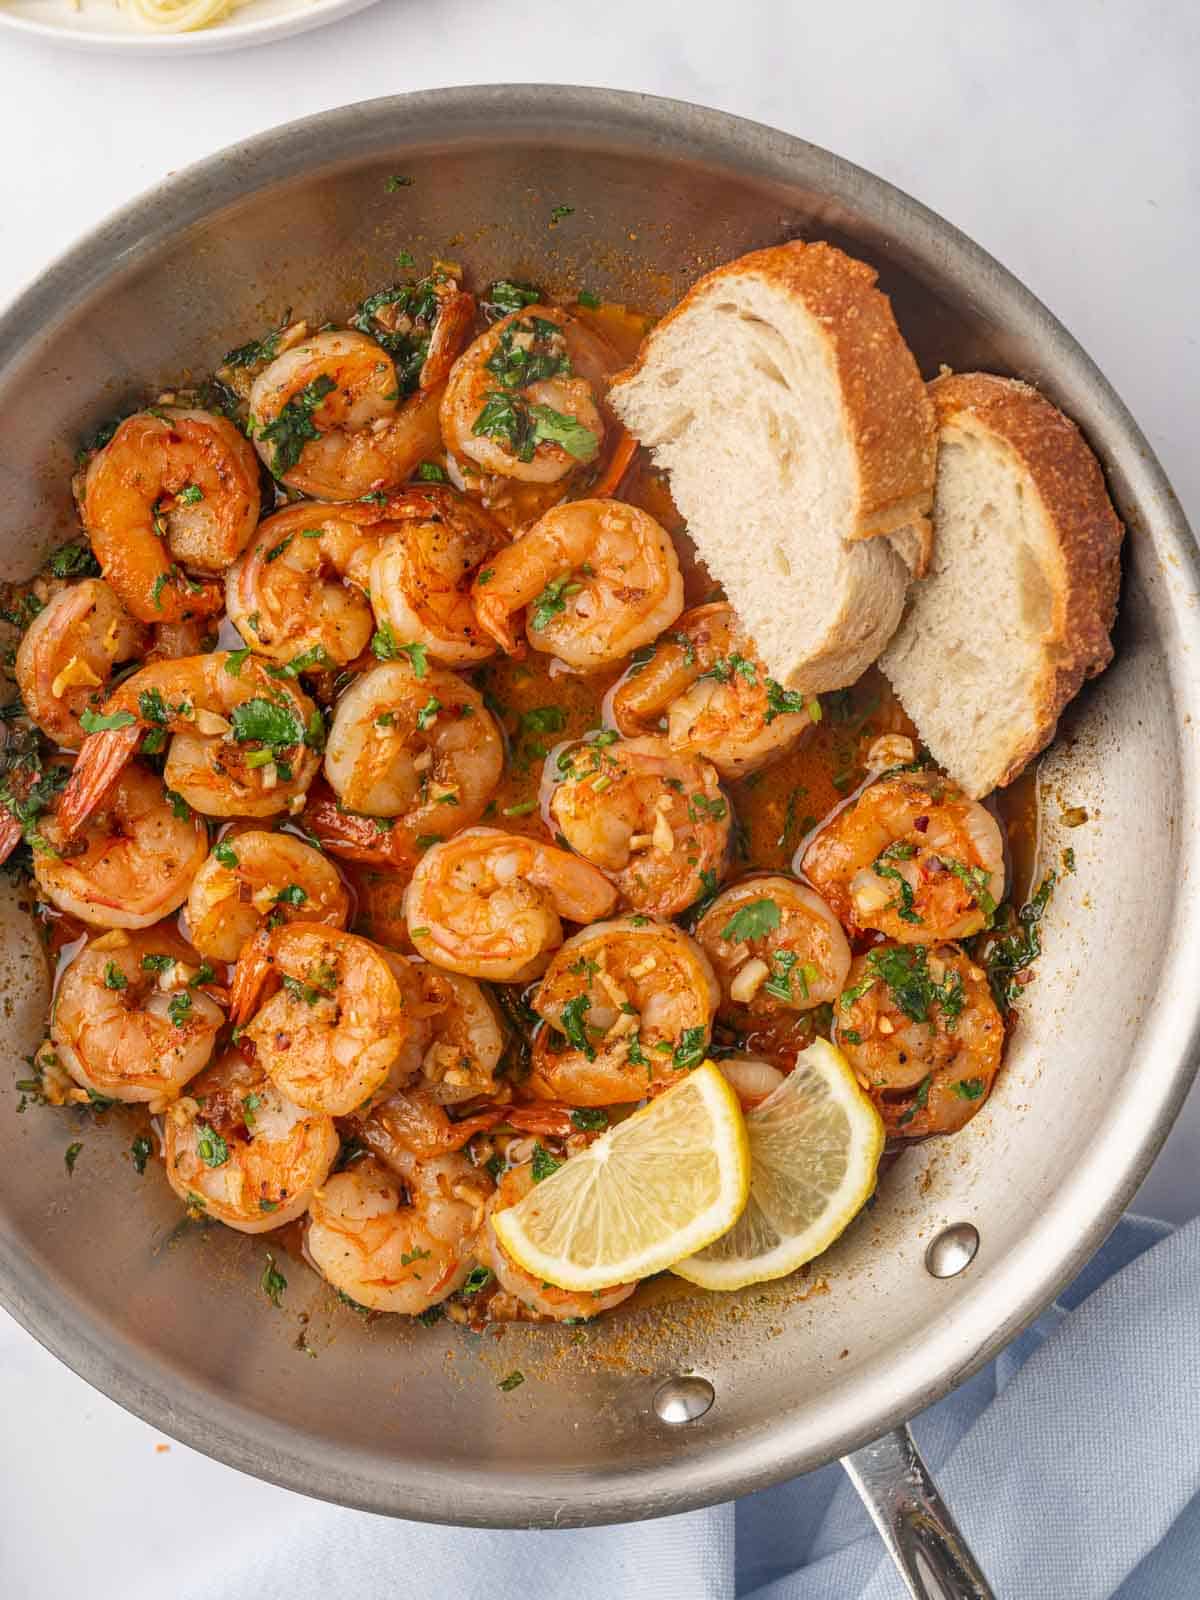 Shrimp scampi with spicy sauce in a skillet with bread and lemon slices.